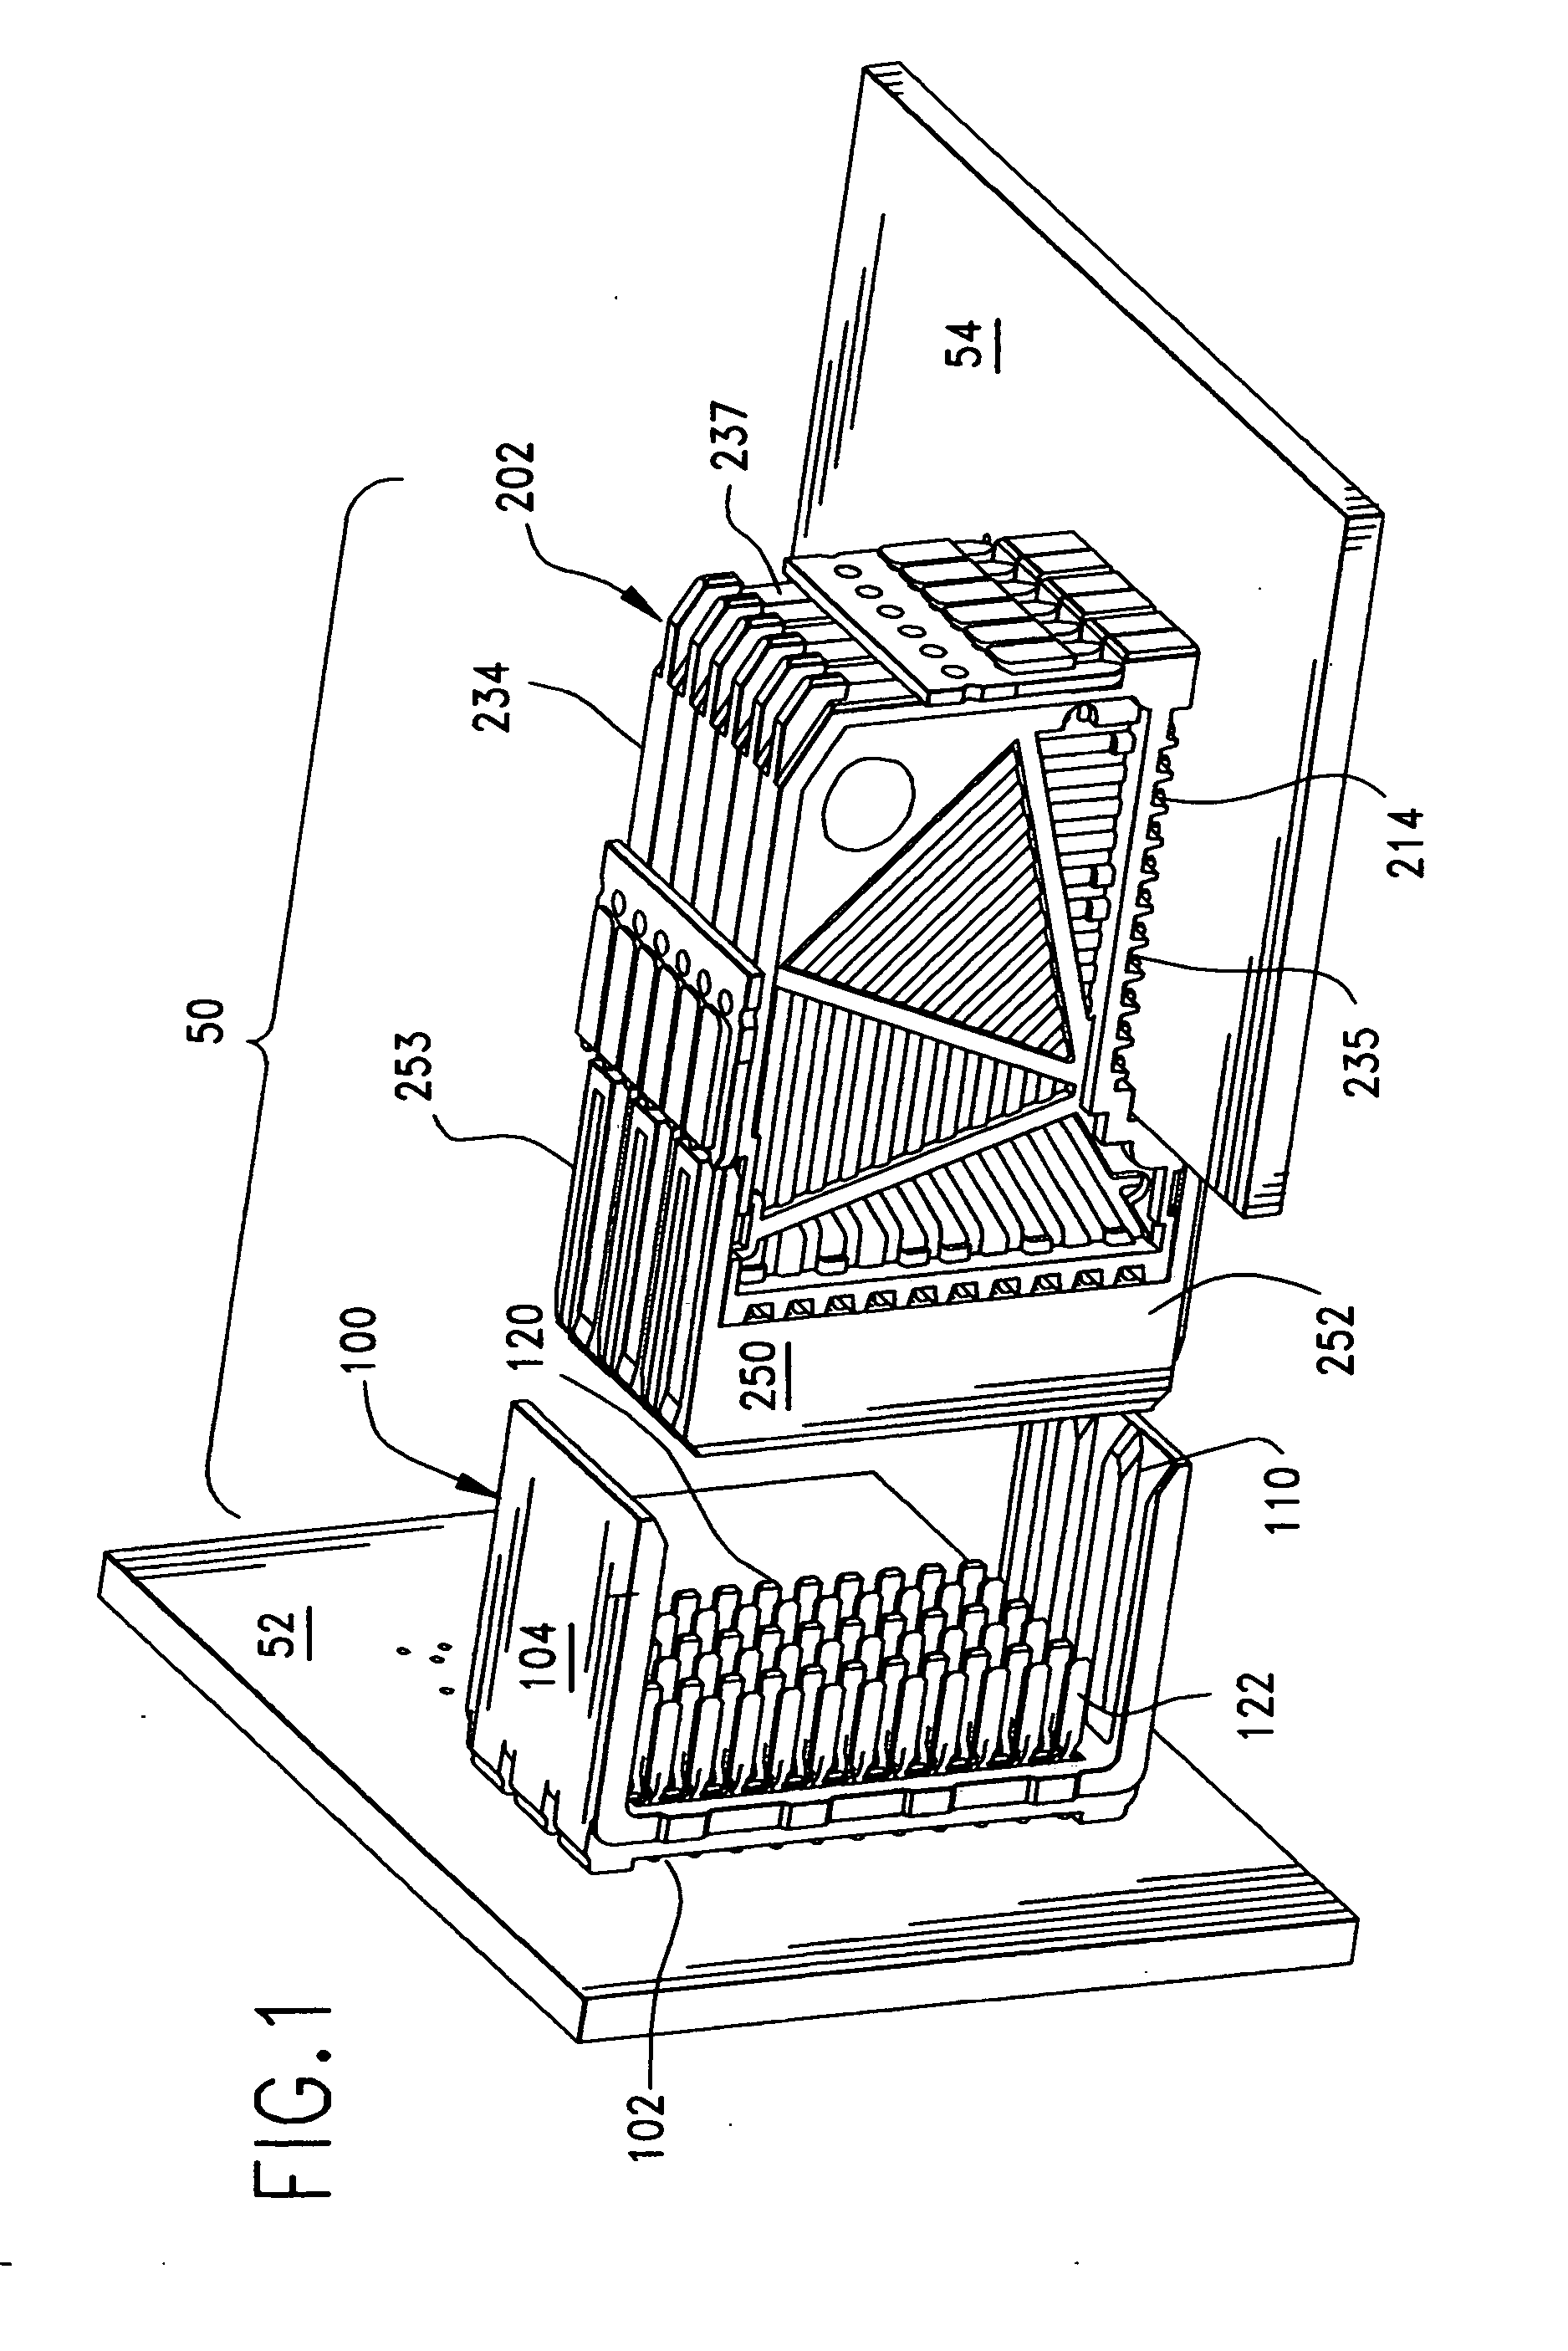 High-density, robust connector with dielectric insert